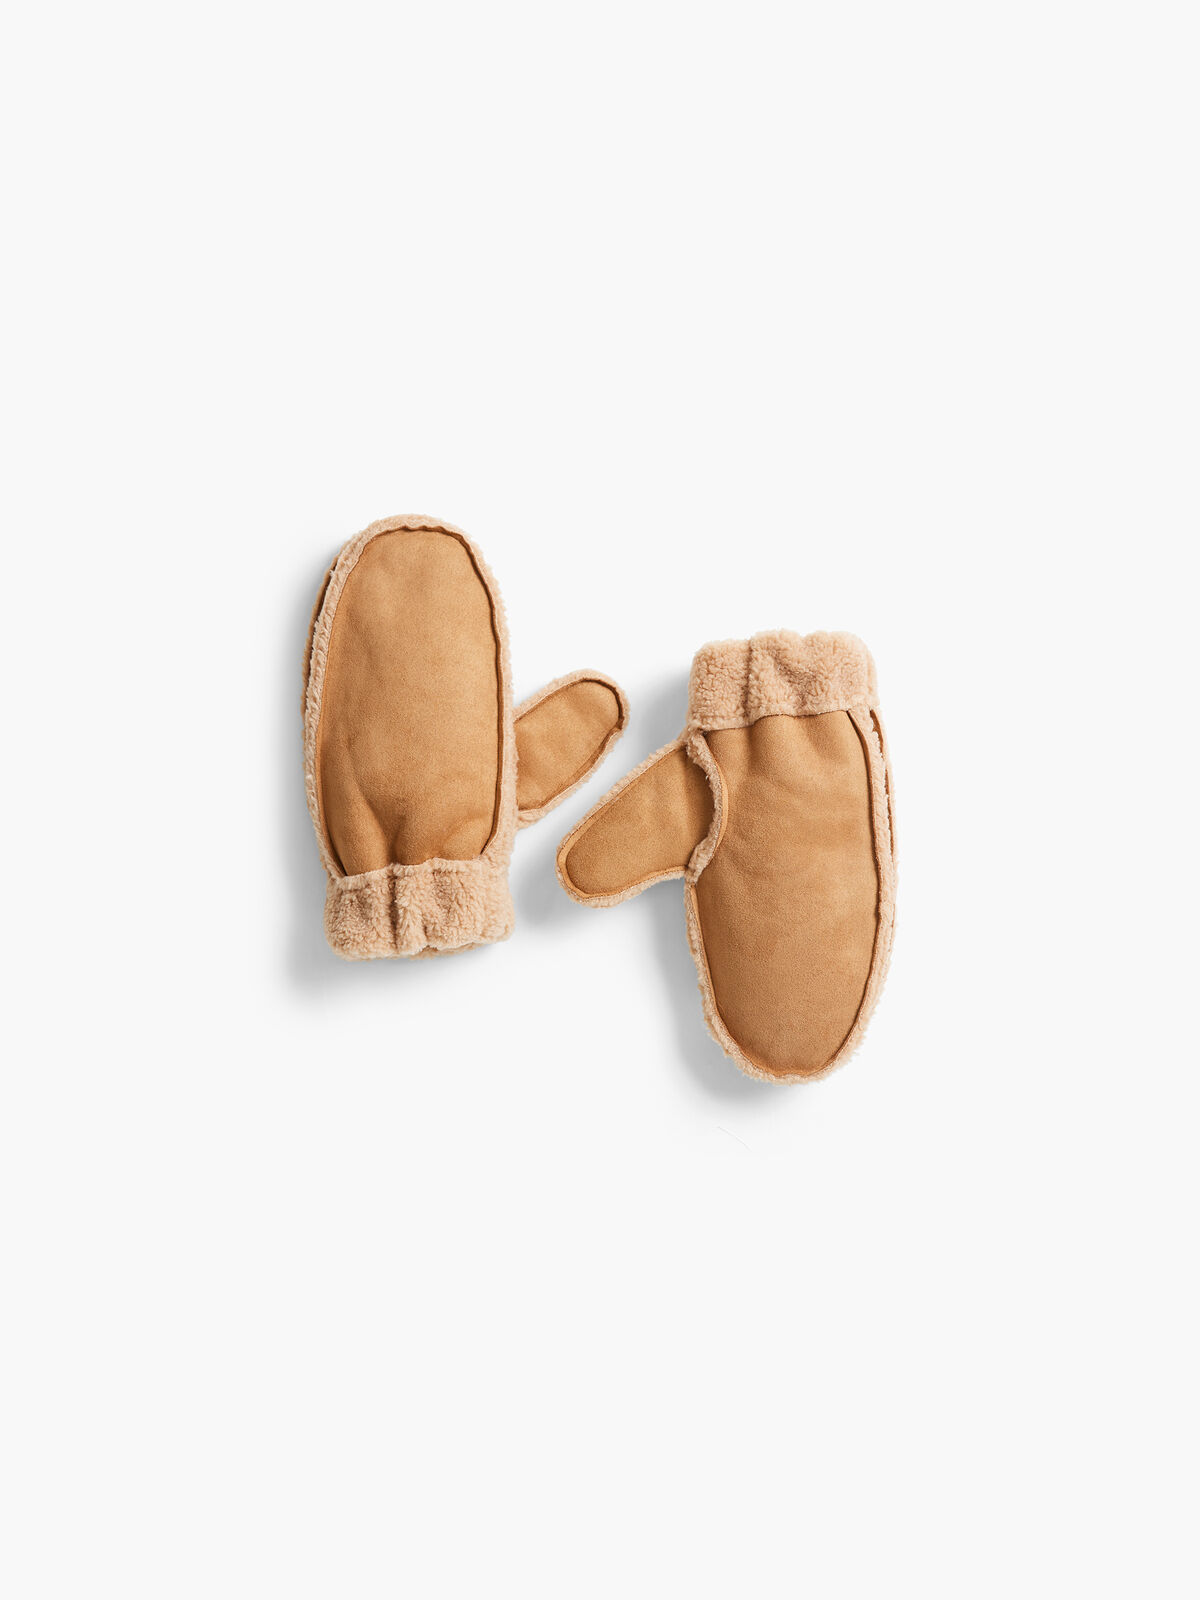 HAT ATTACK Cozy Faux Shearling Mitten